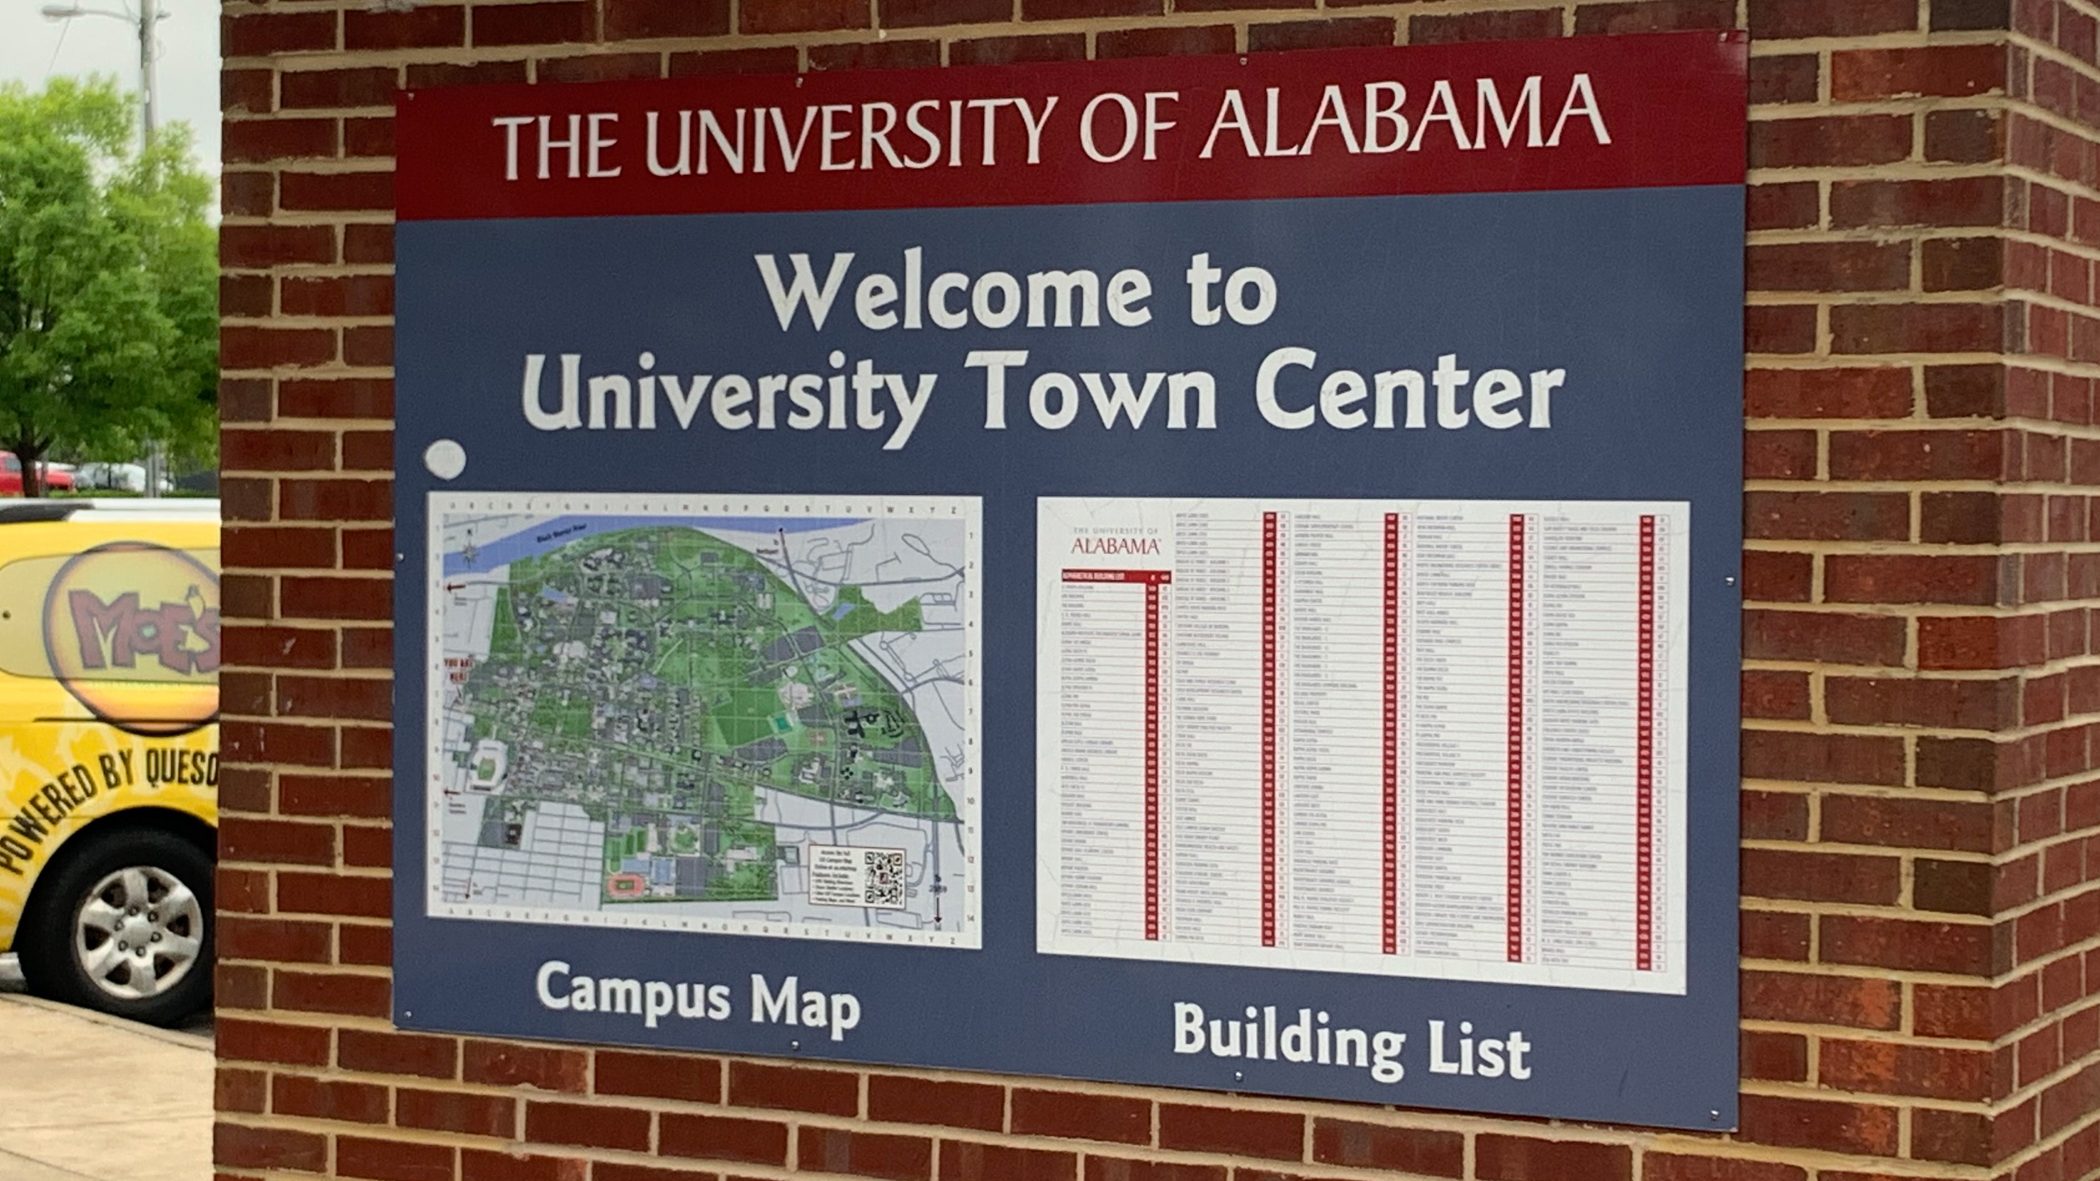 A map of University Town Center